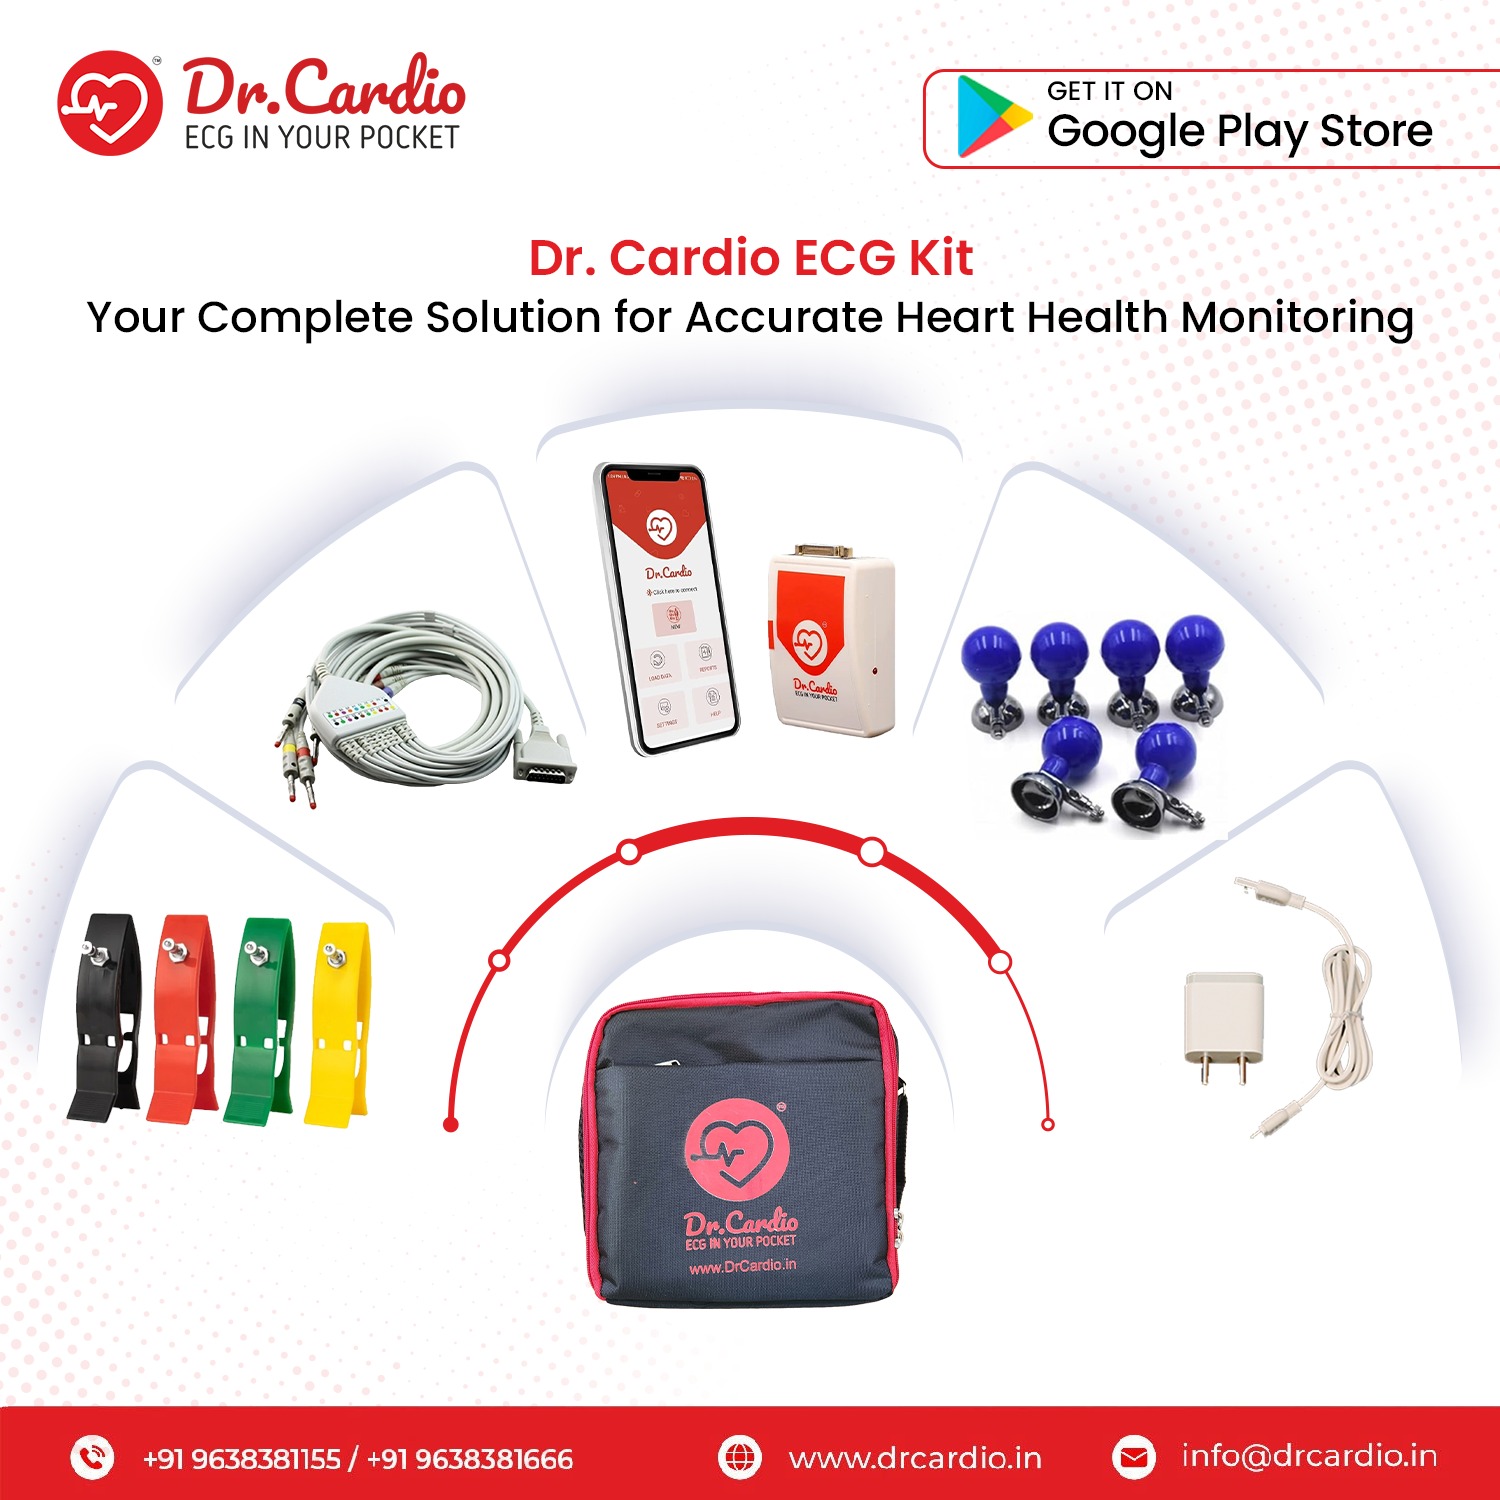 Accurate heart health monitoring at your fingertips with the Dr. Cardio ECG Kit.